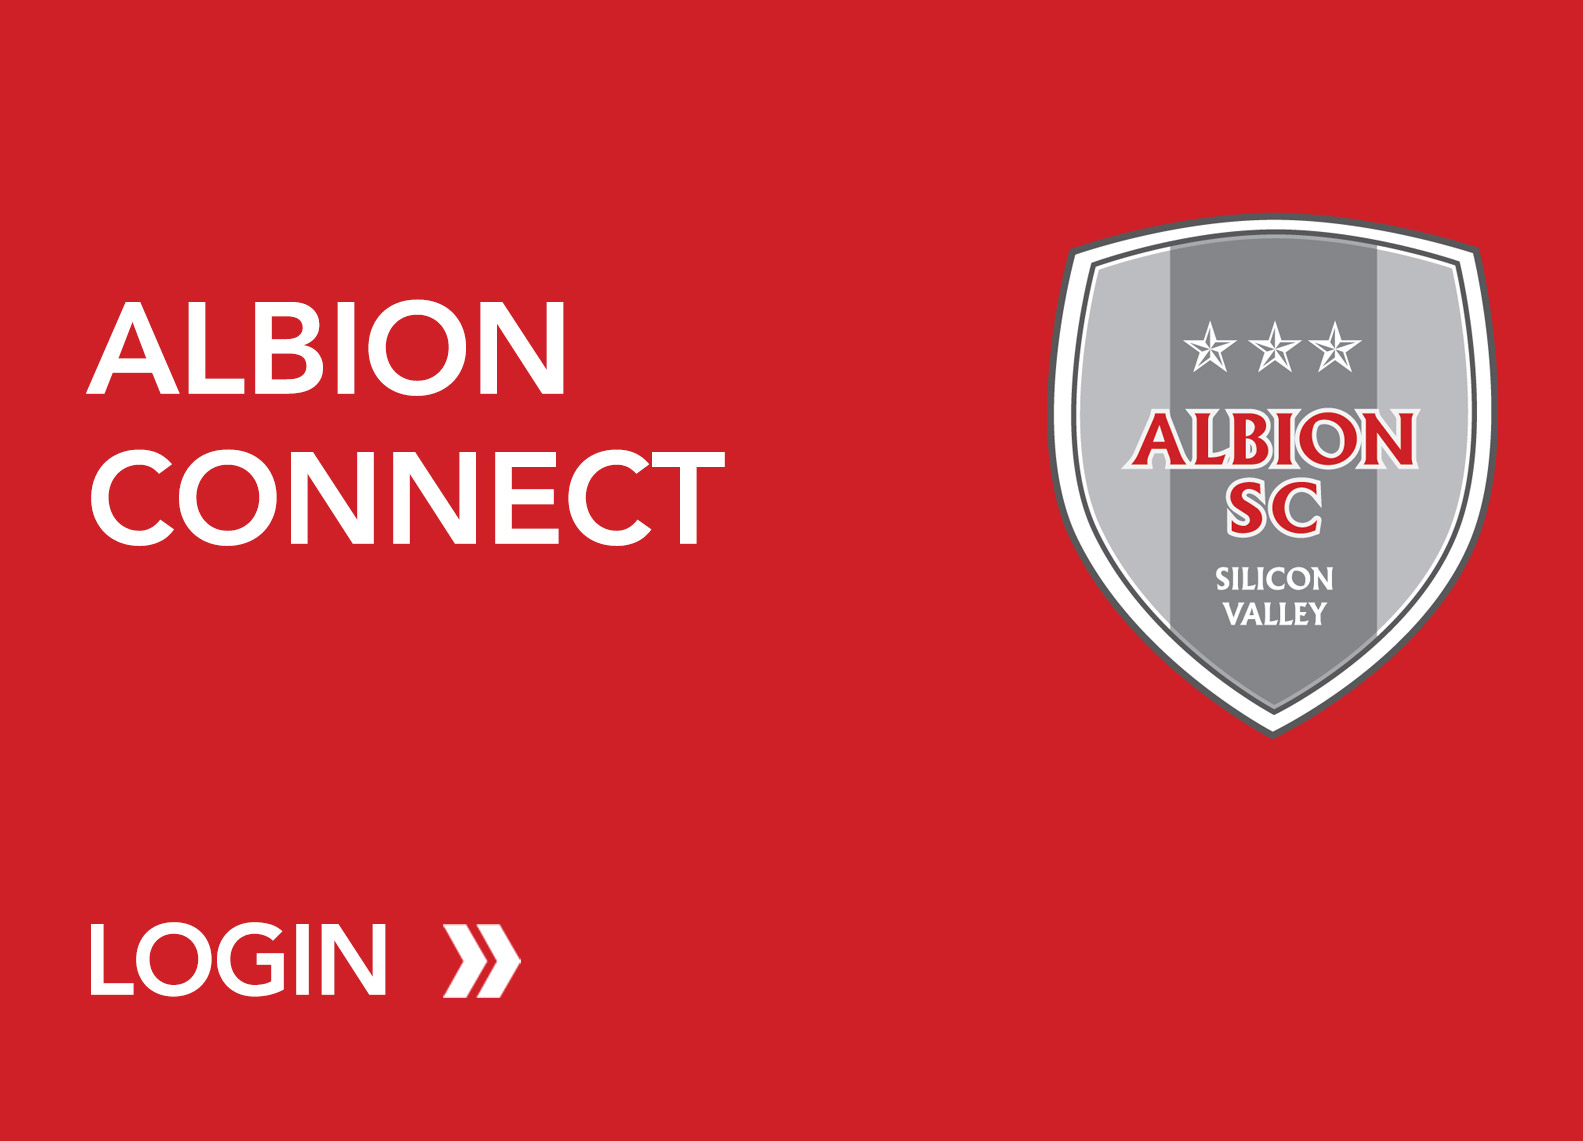 ALBION SC Silicon Valley Redwood City